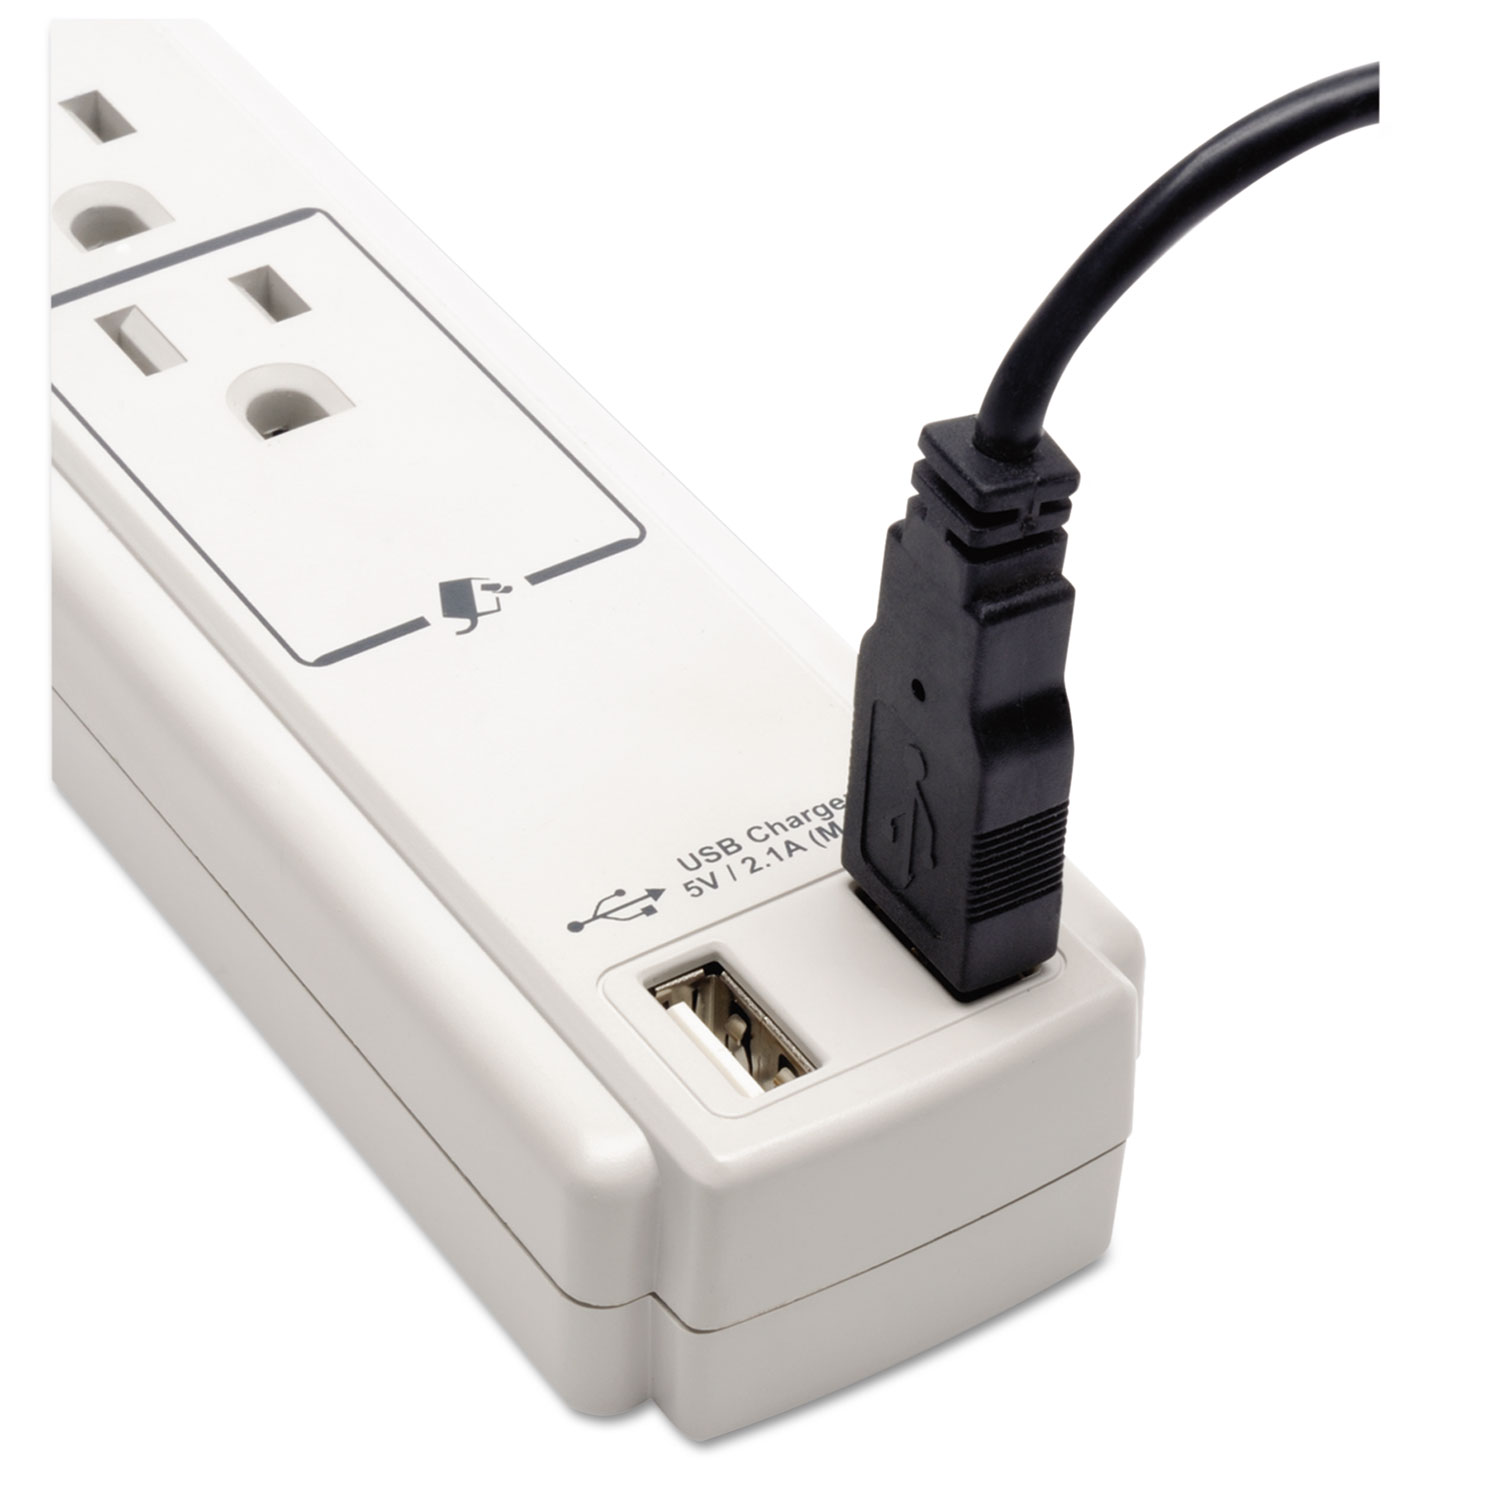 Protect It! Surge Suppressor, 6 Outlets, 6 ft Cord, 990 Joules, Cool Gray